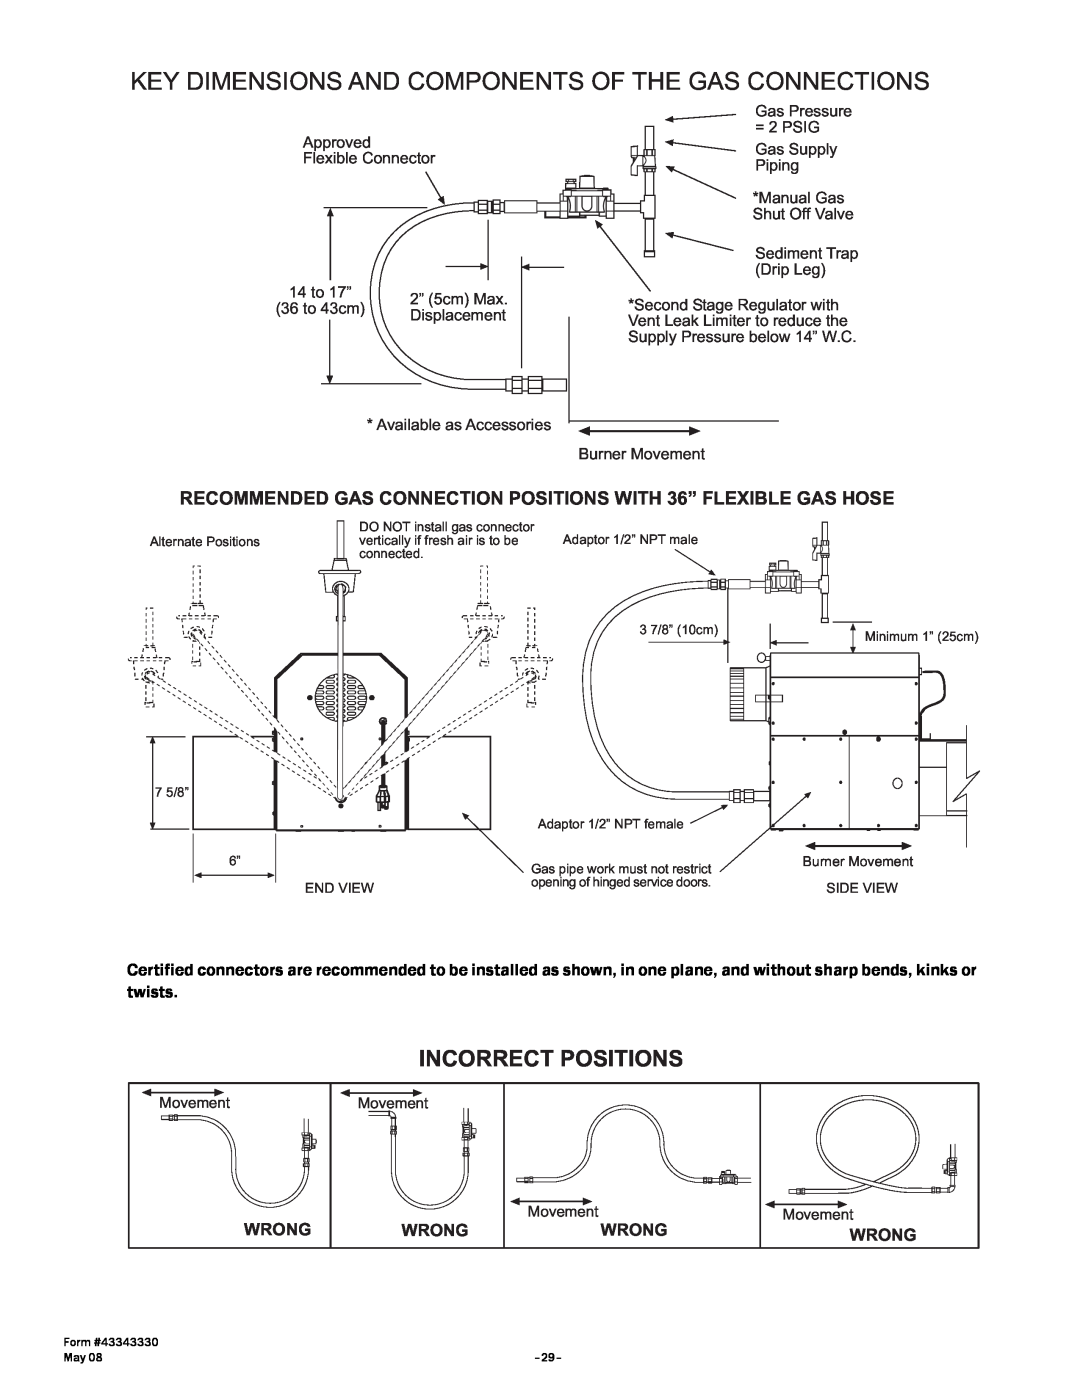 Gas-Fired Products PTS Series manual Incorrect Positions, Wrong, Movement, Gas pipe work must not restrict, Form #43343330 